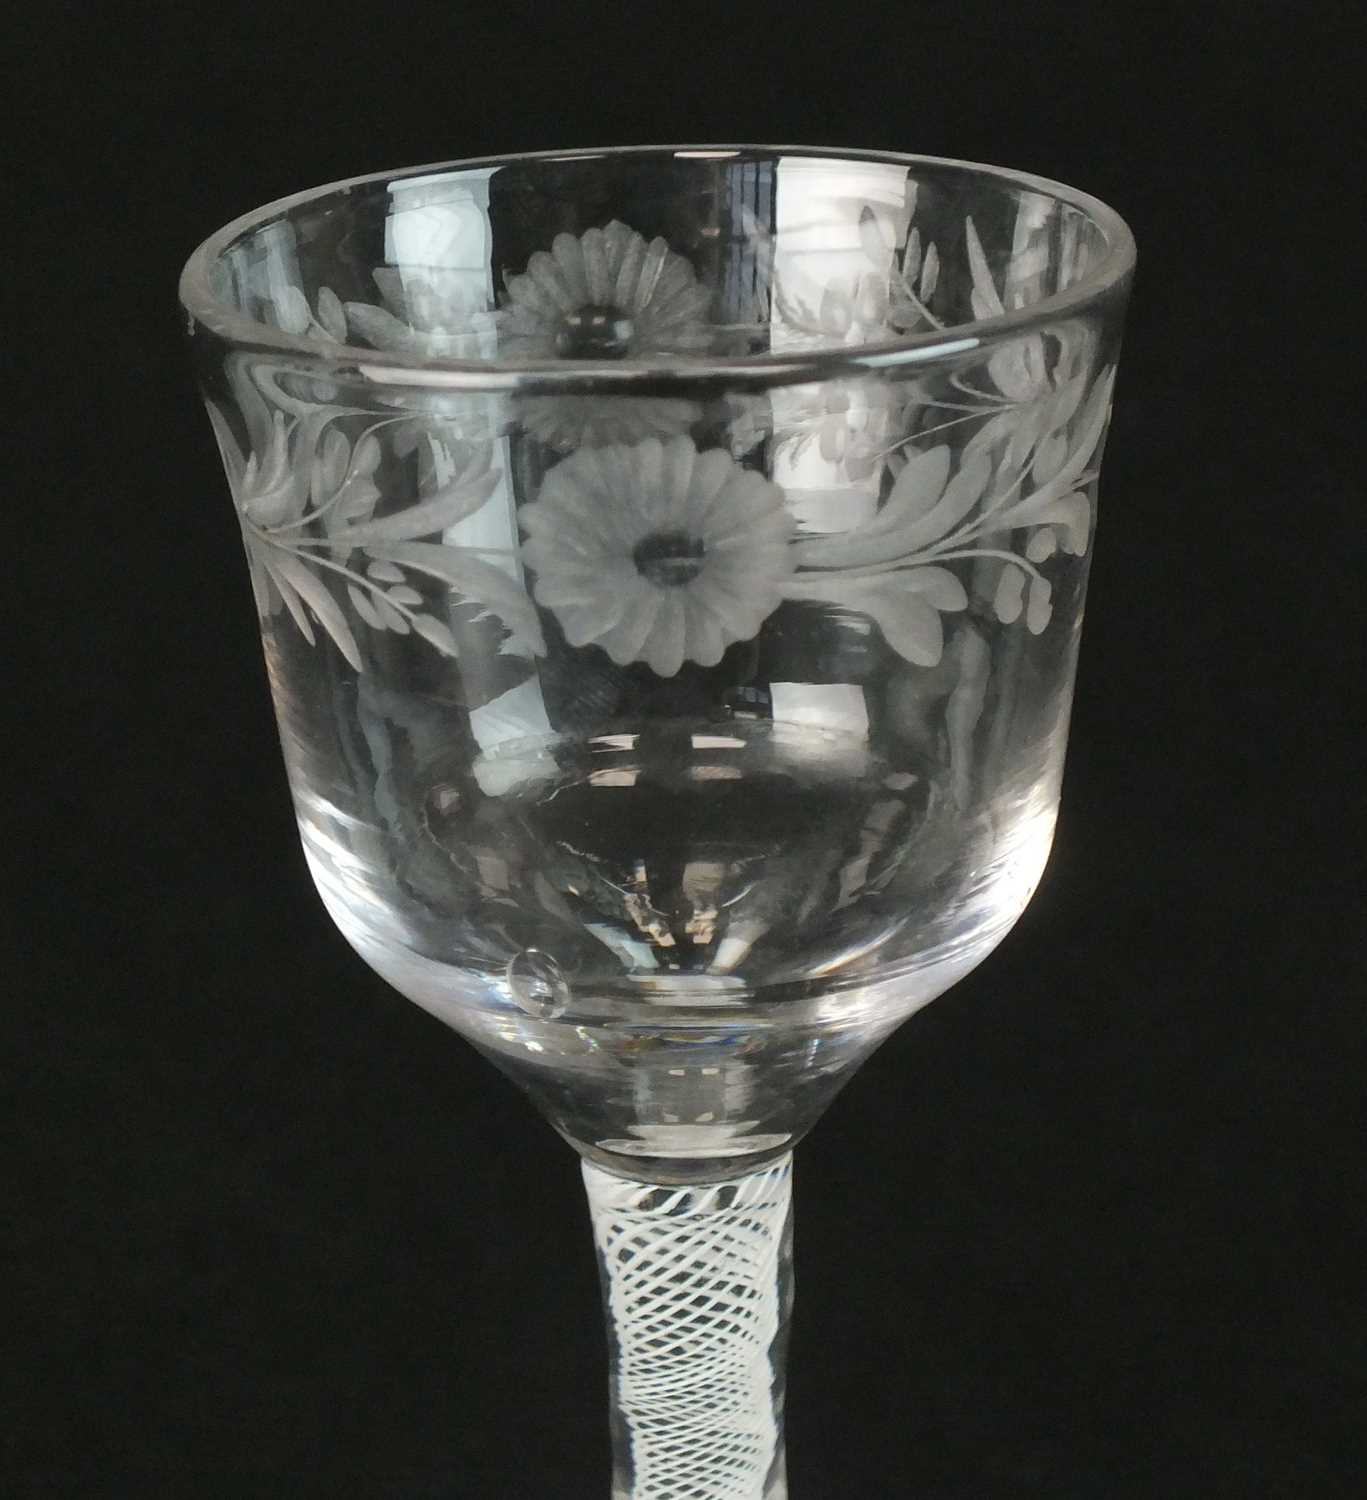 An 18th-century drinking glass - Image 2 of 3